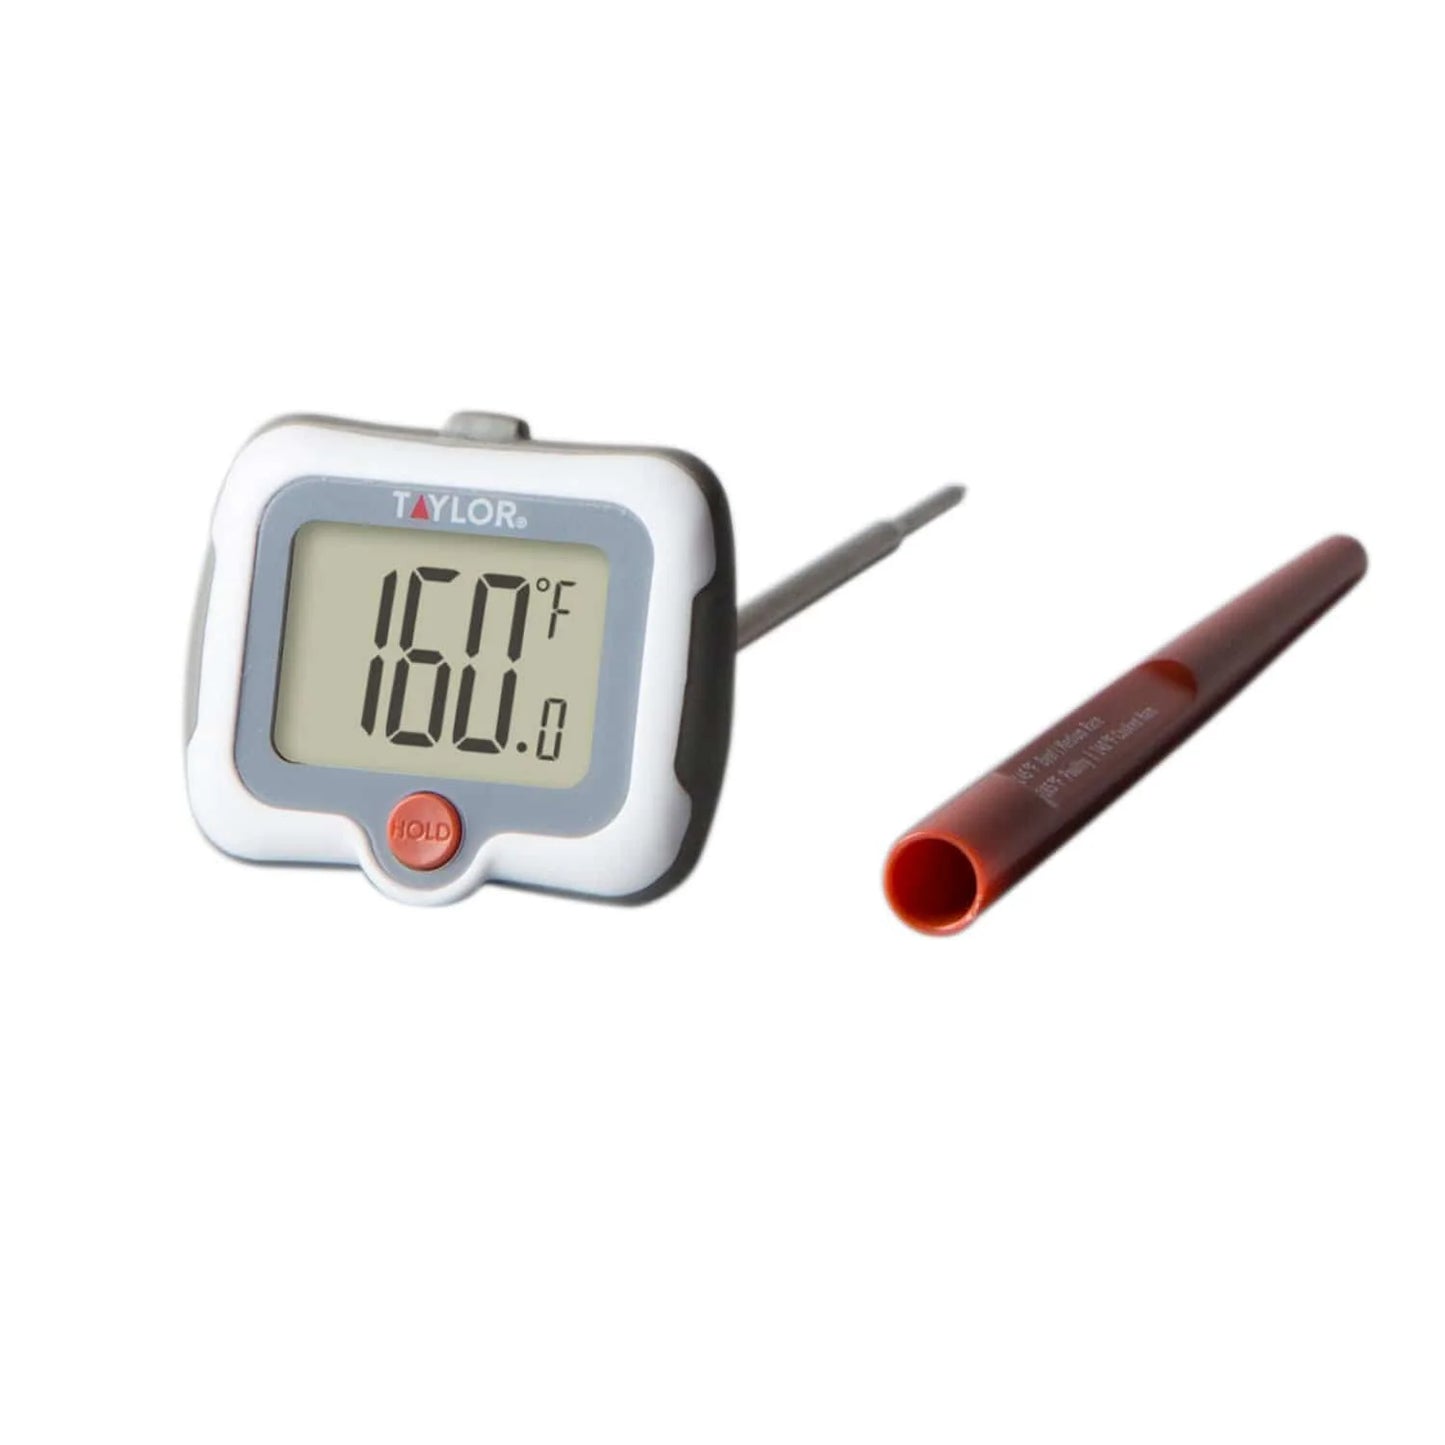 Taylor Pivoting Display Thermometer